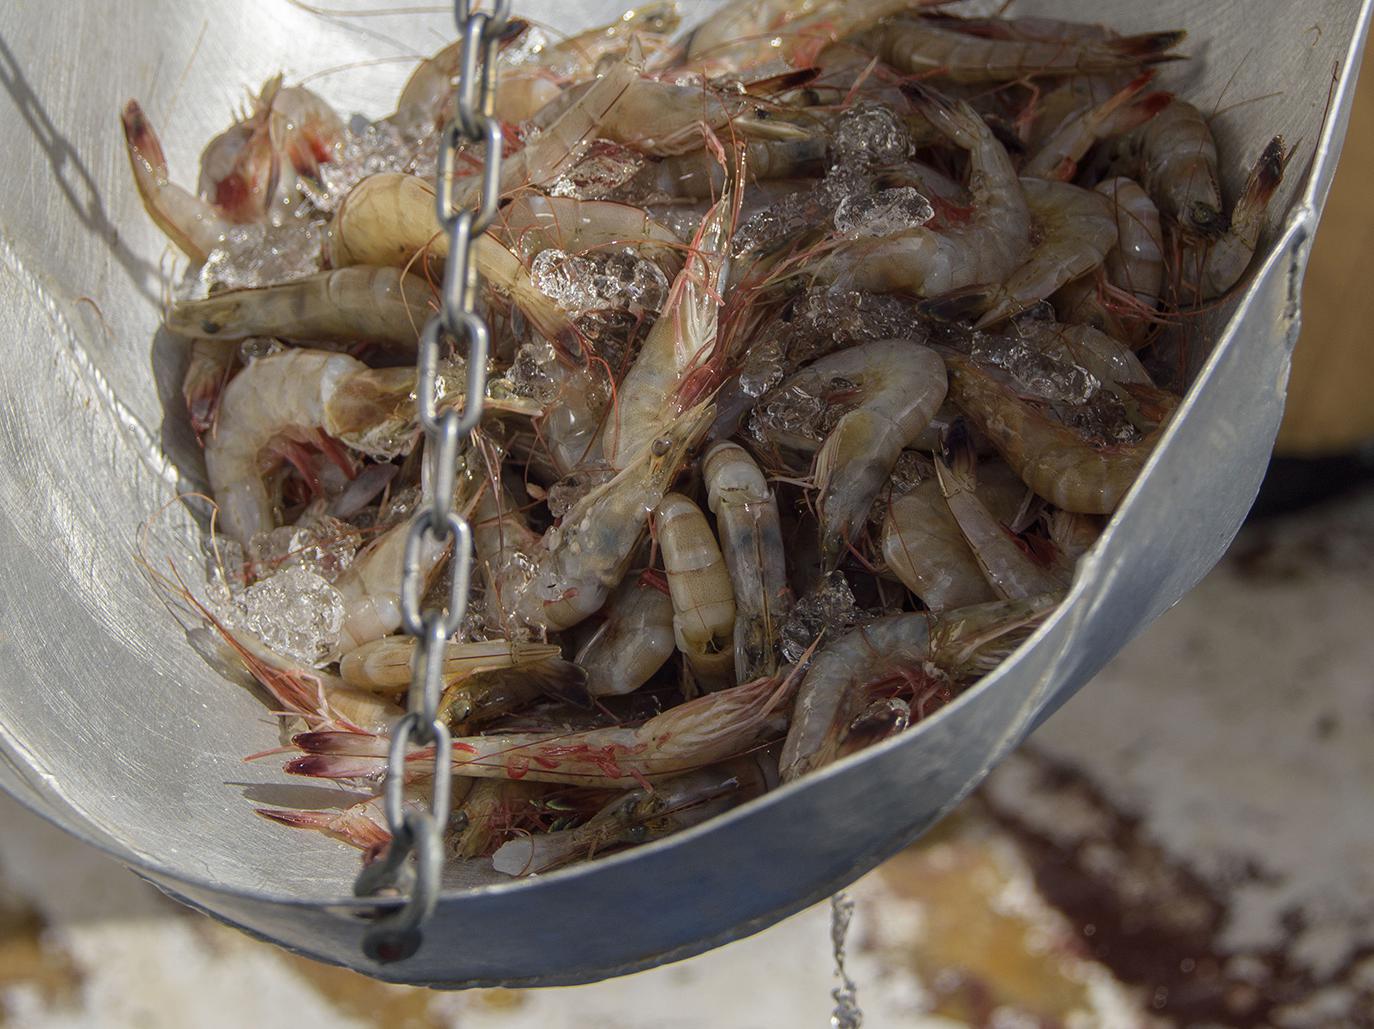 Mississippi’s shrimp season, which opened June 6, is mostly yielding small brown shrimp. However, hot weather and warmer water in the Gulf is creating ideal growing conditions for the shrimp. (File Photo by MSU Extension Service/Kevin Hudson)